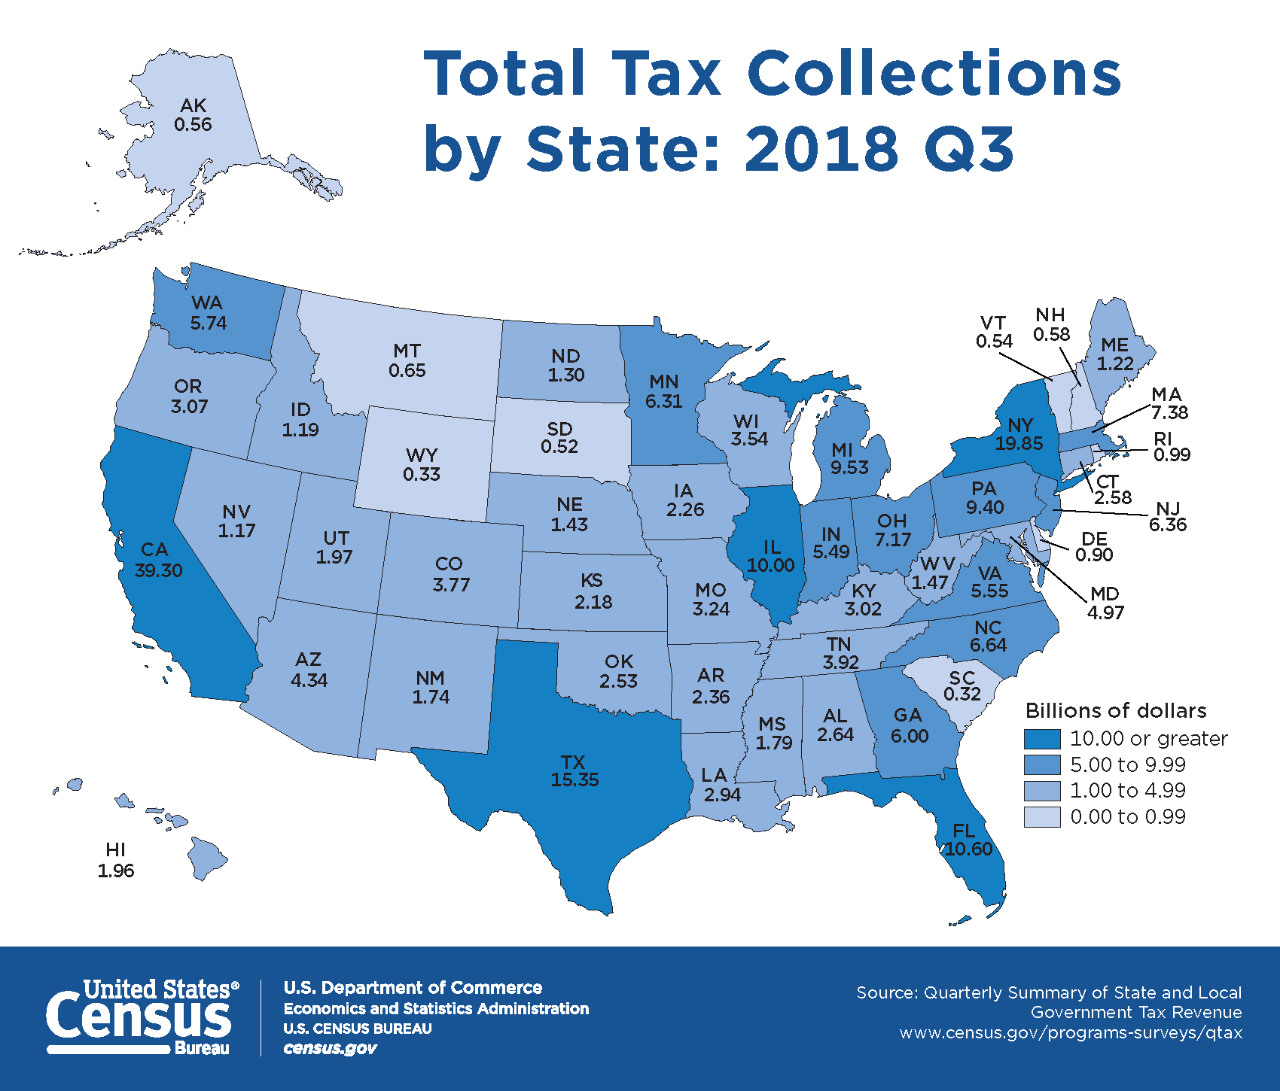 Total Tax Collections by State: 2018 Q3